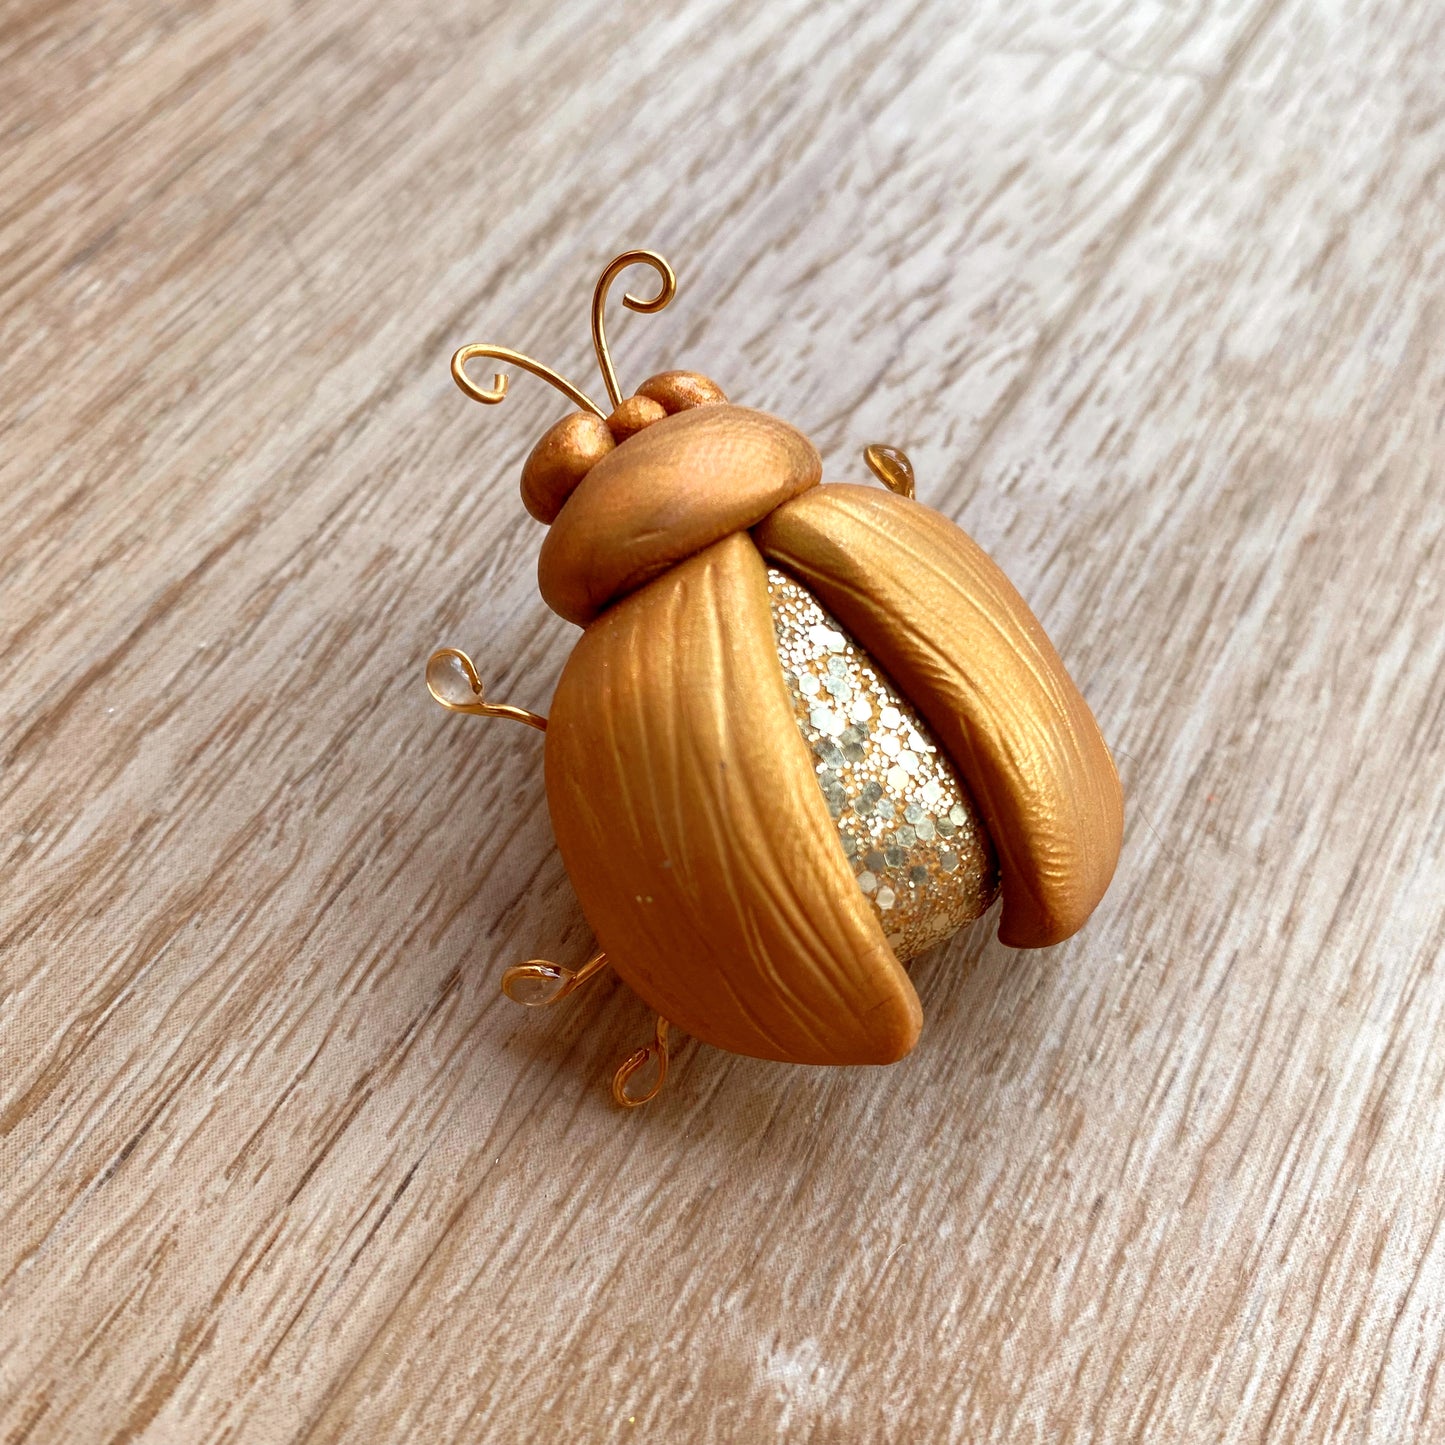 3D polymer clay beetle brooch pin in gold glitter colour